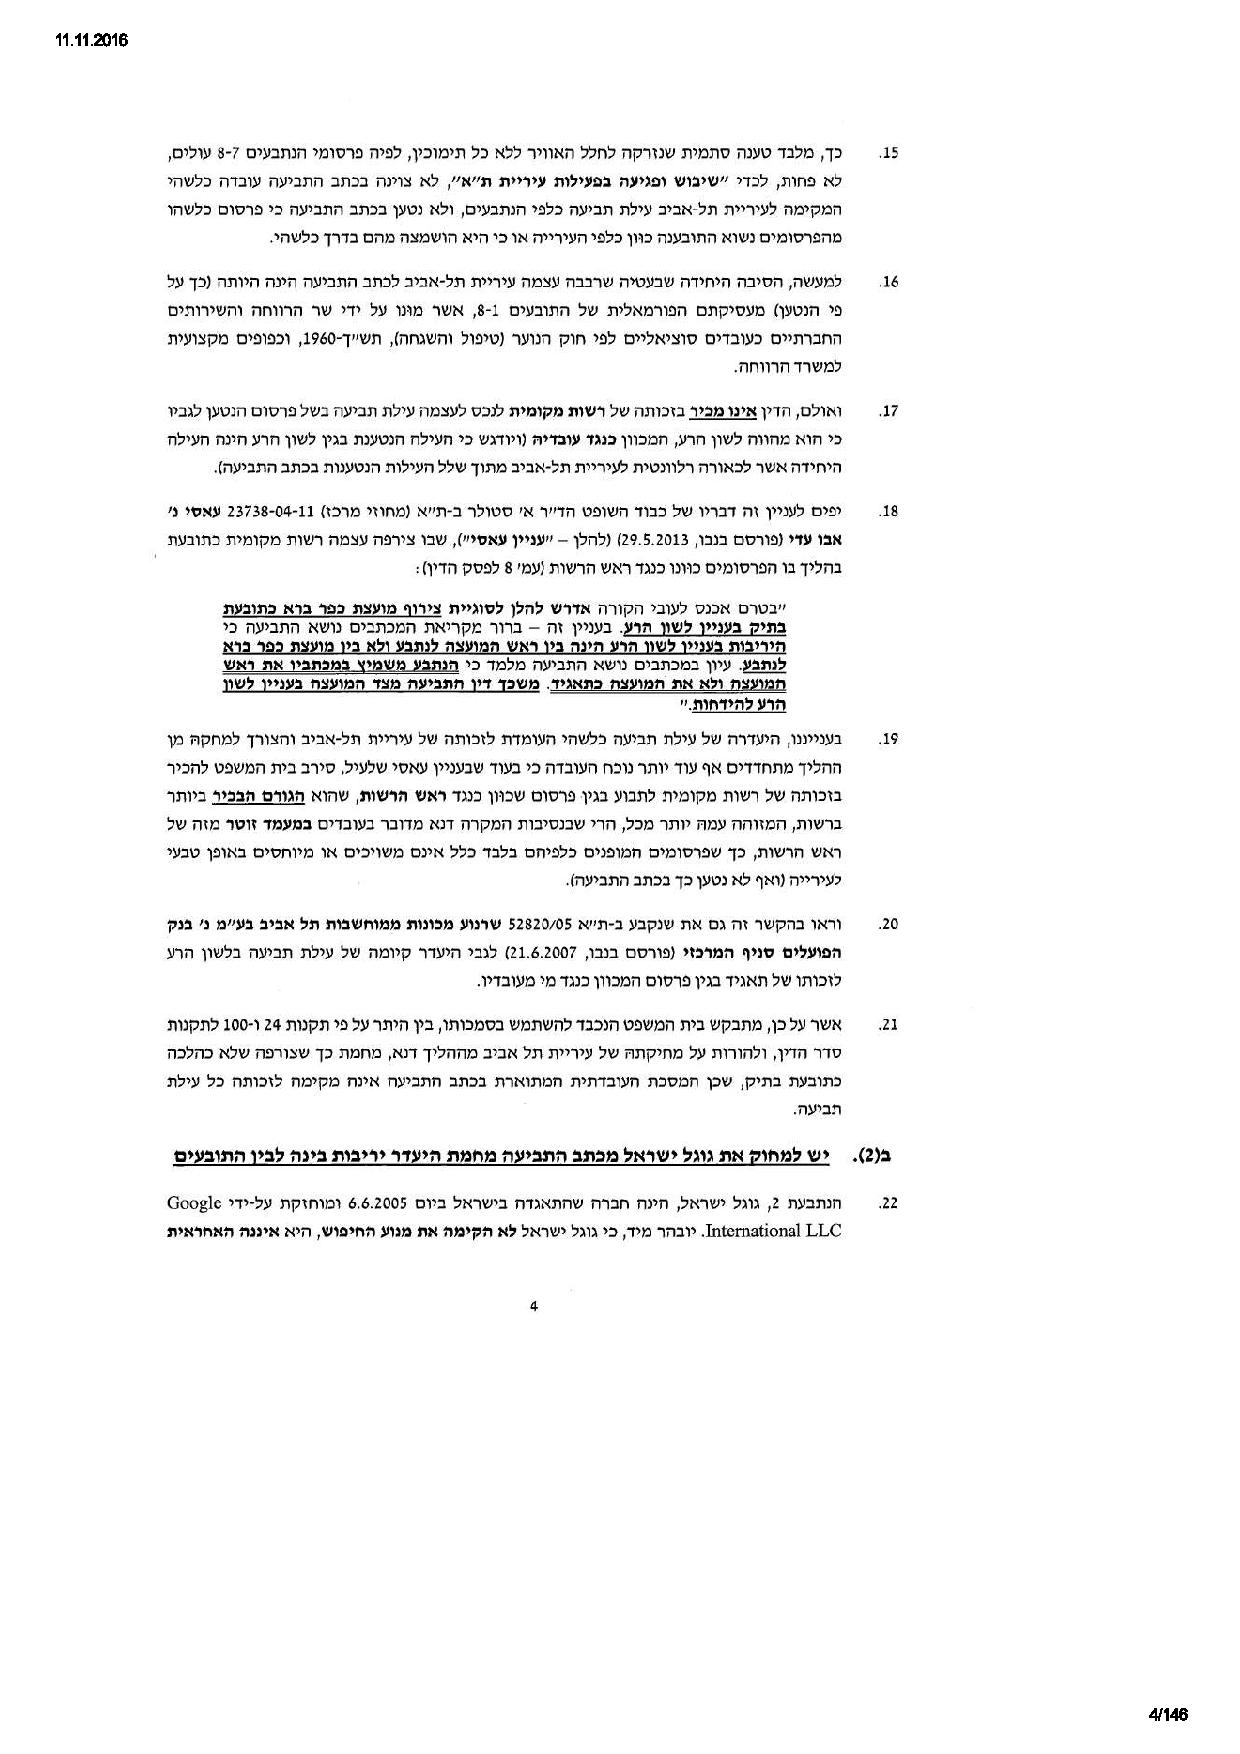 document-page-004